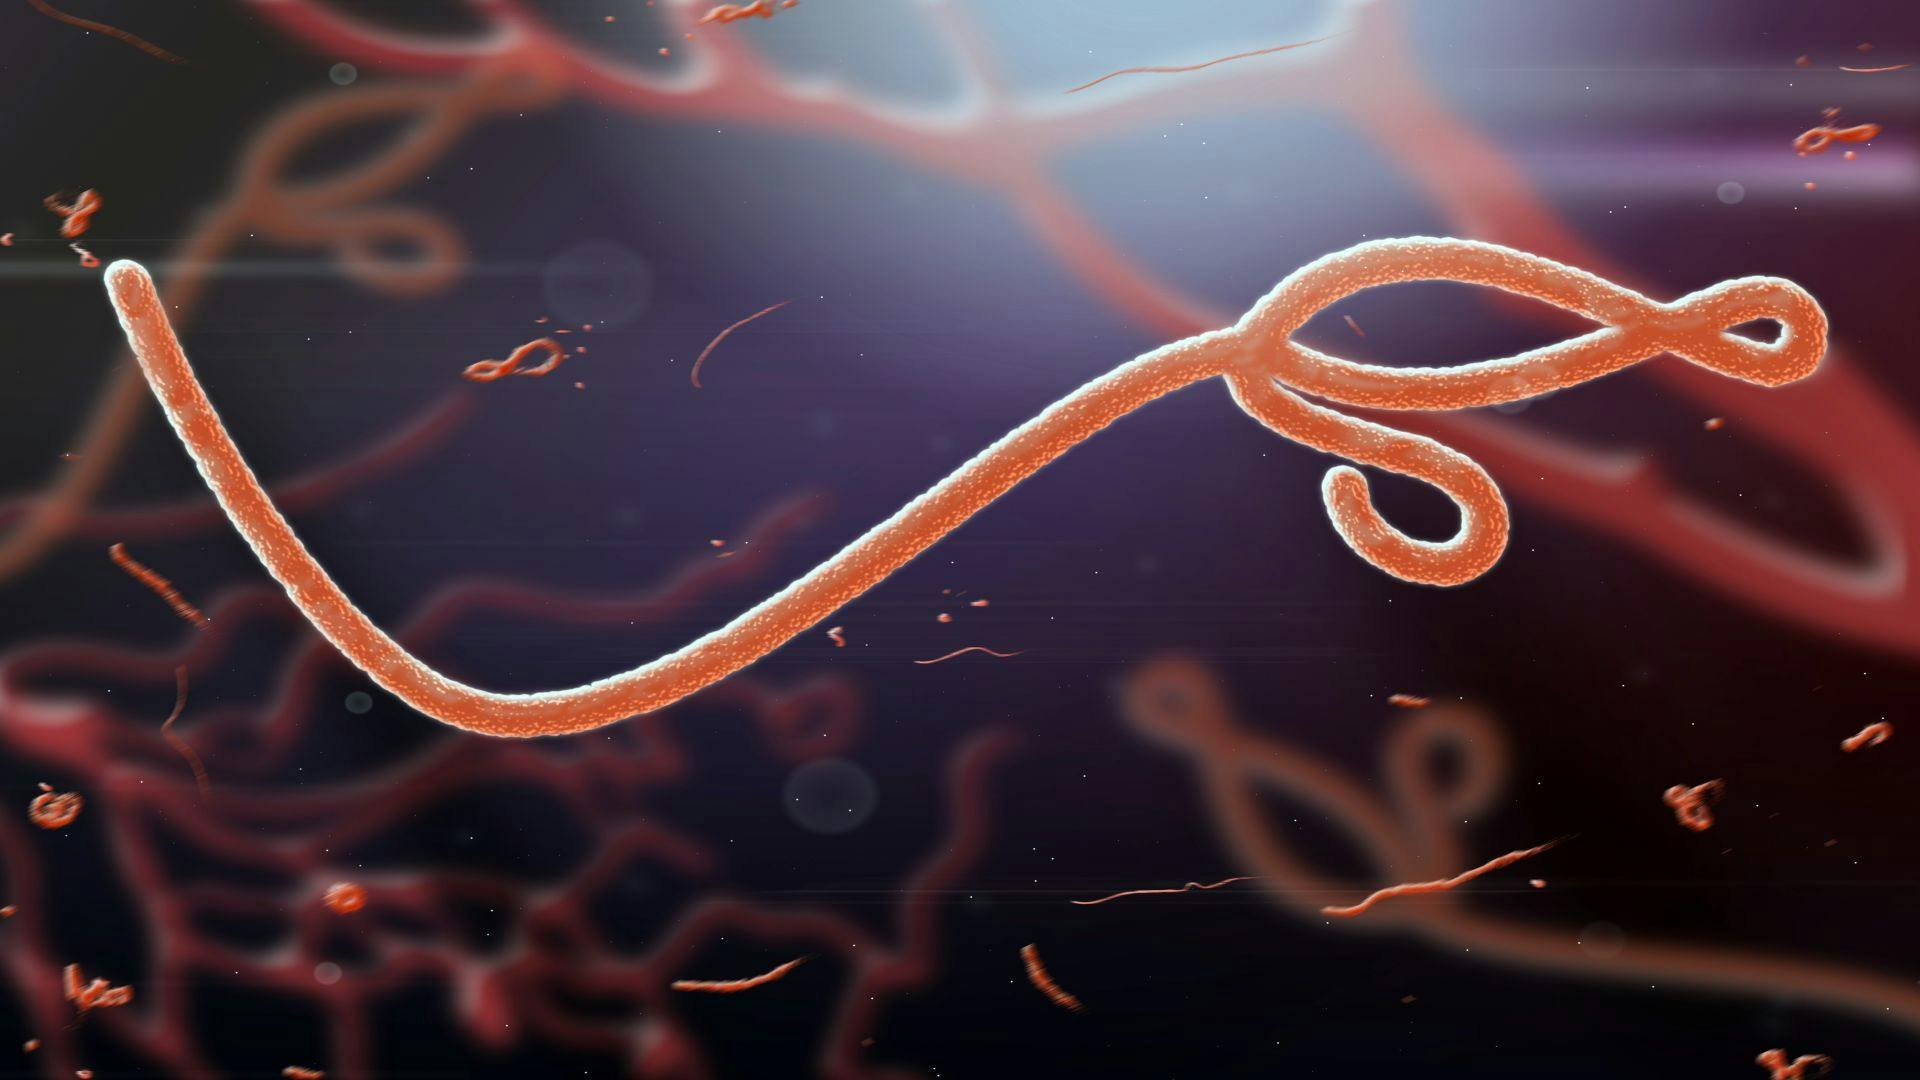 Johns Hopkins Materials Scientists Probe a Protein's Role in Accelerating Ebola's Spread